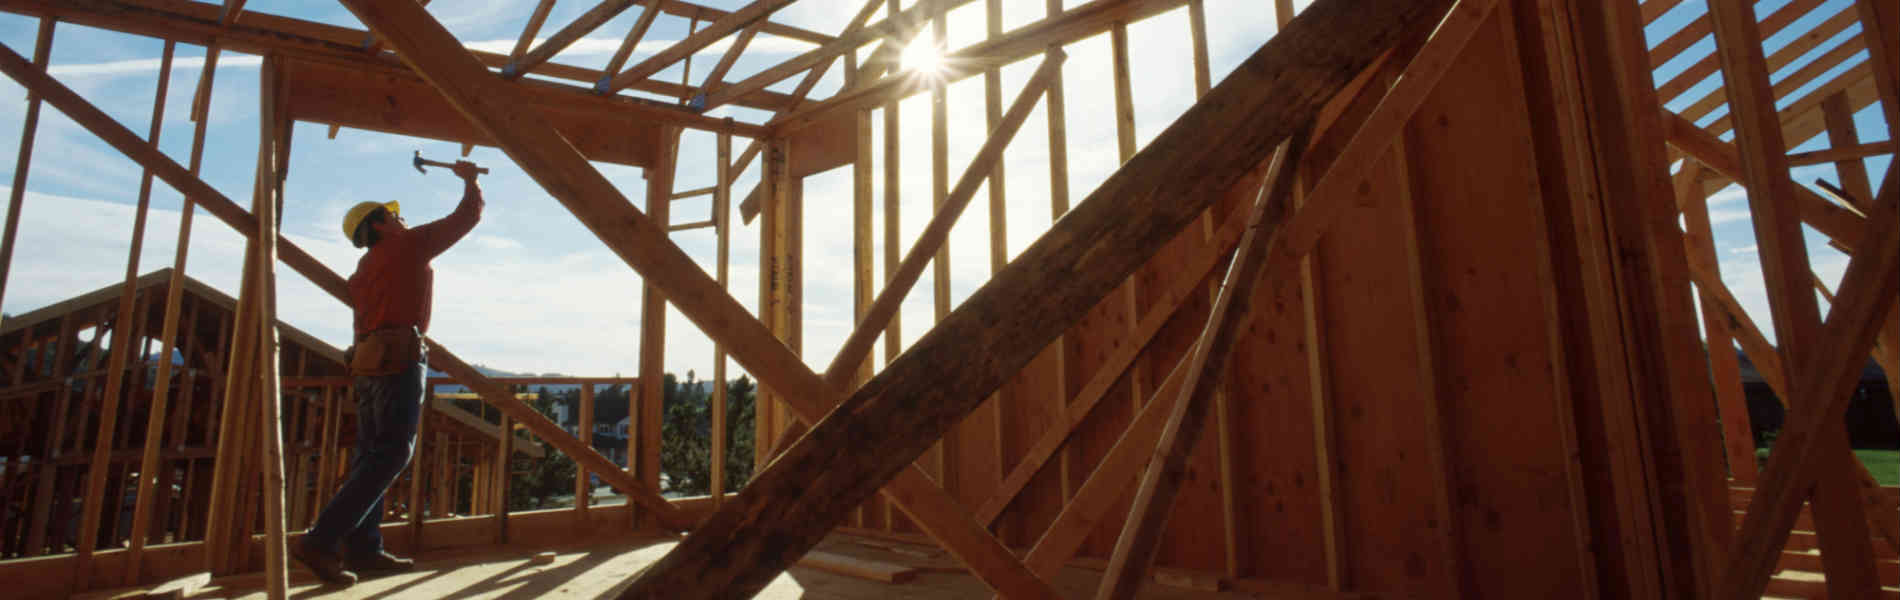 Timber frame structure